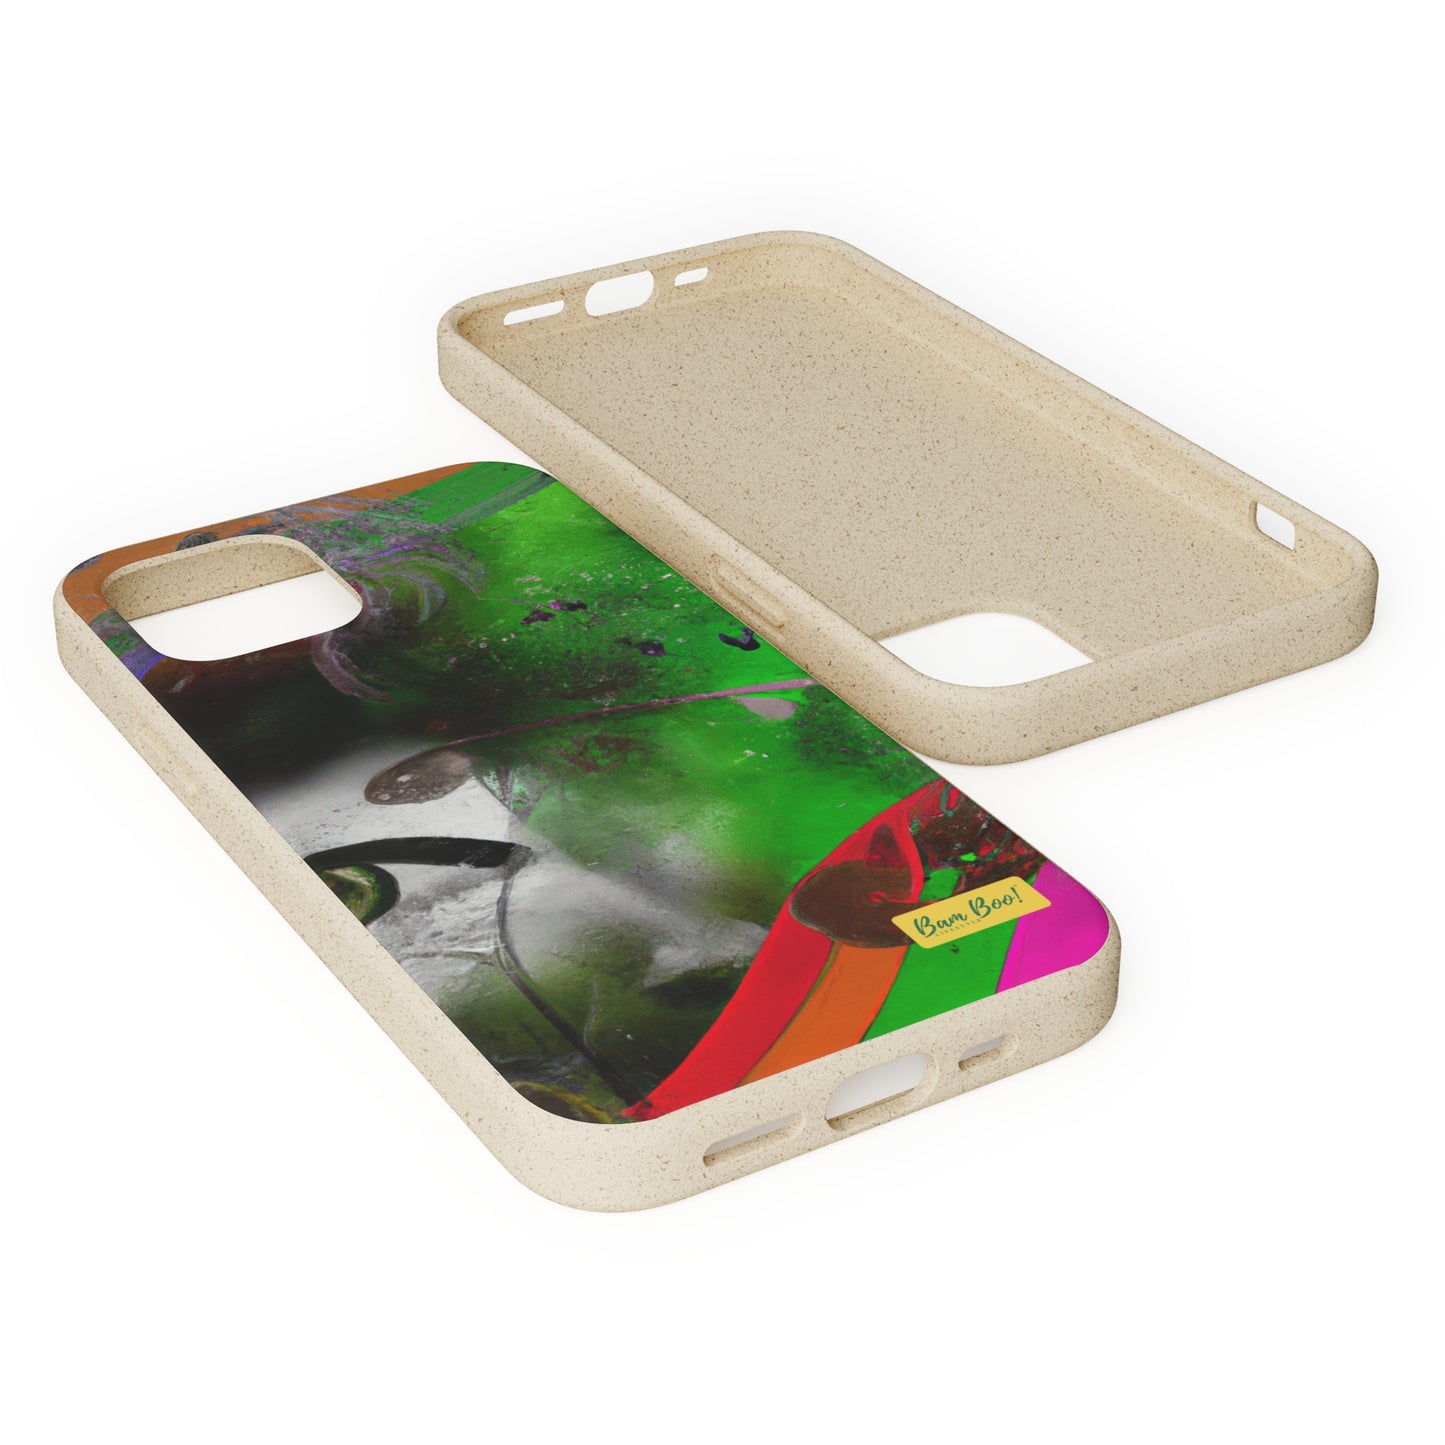 "Visually Challenging: Interweaving Photography and Painting" - Bam Boo! Lifestyle Eco-friendly Cases